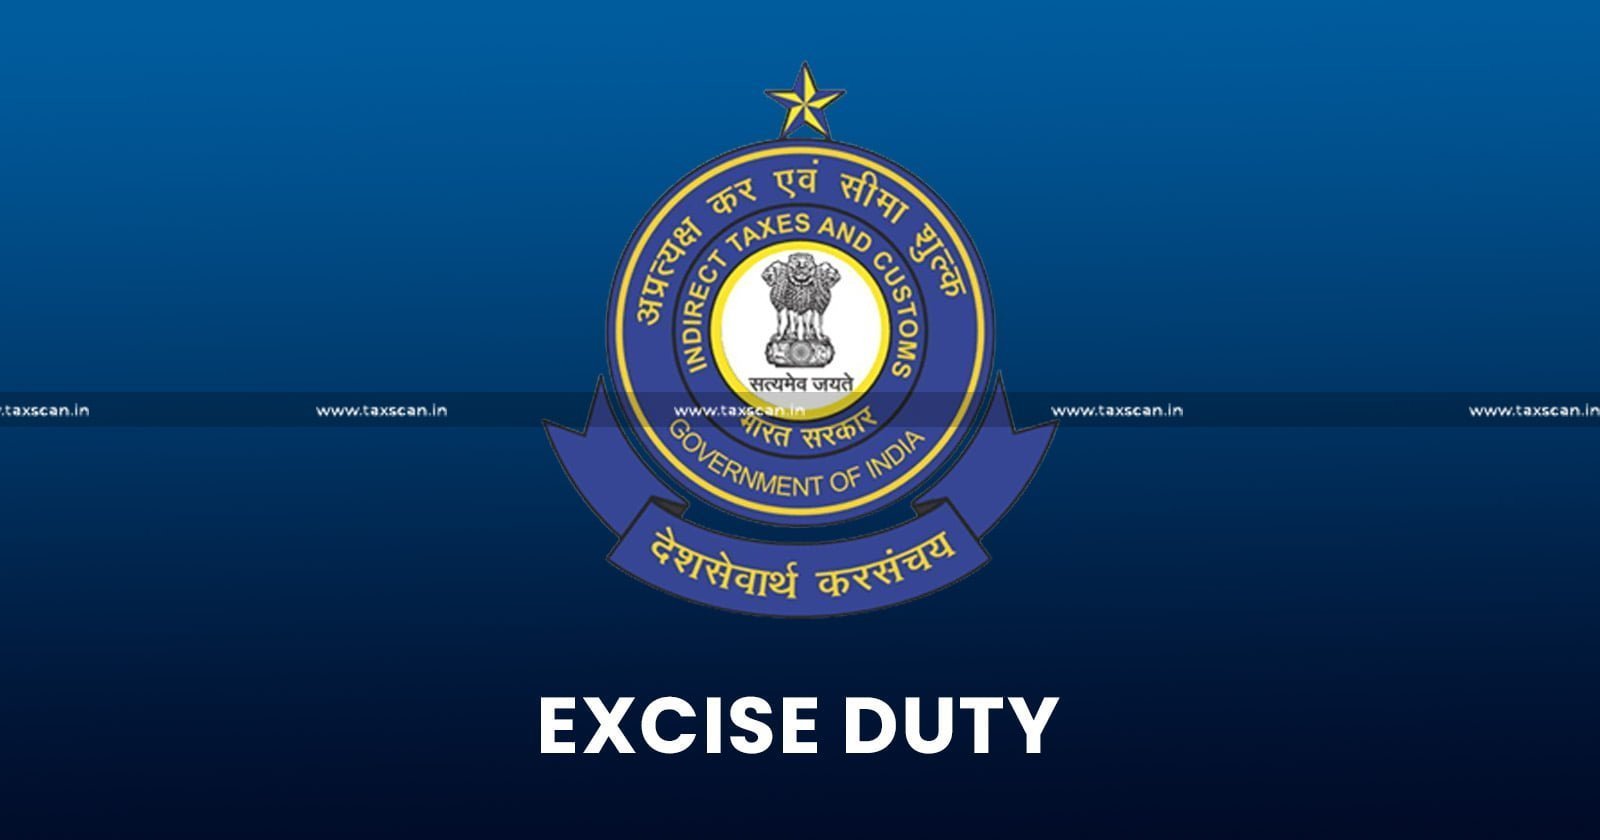 Excise Duty Demand Not Valid - Excise Duty Demand - Excise Duty - Duty Liability - Issuance of SCN - SCN - CESTAT - taxscan